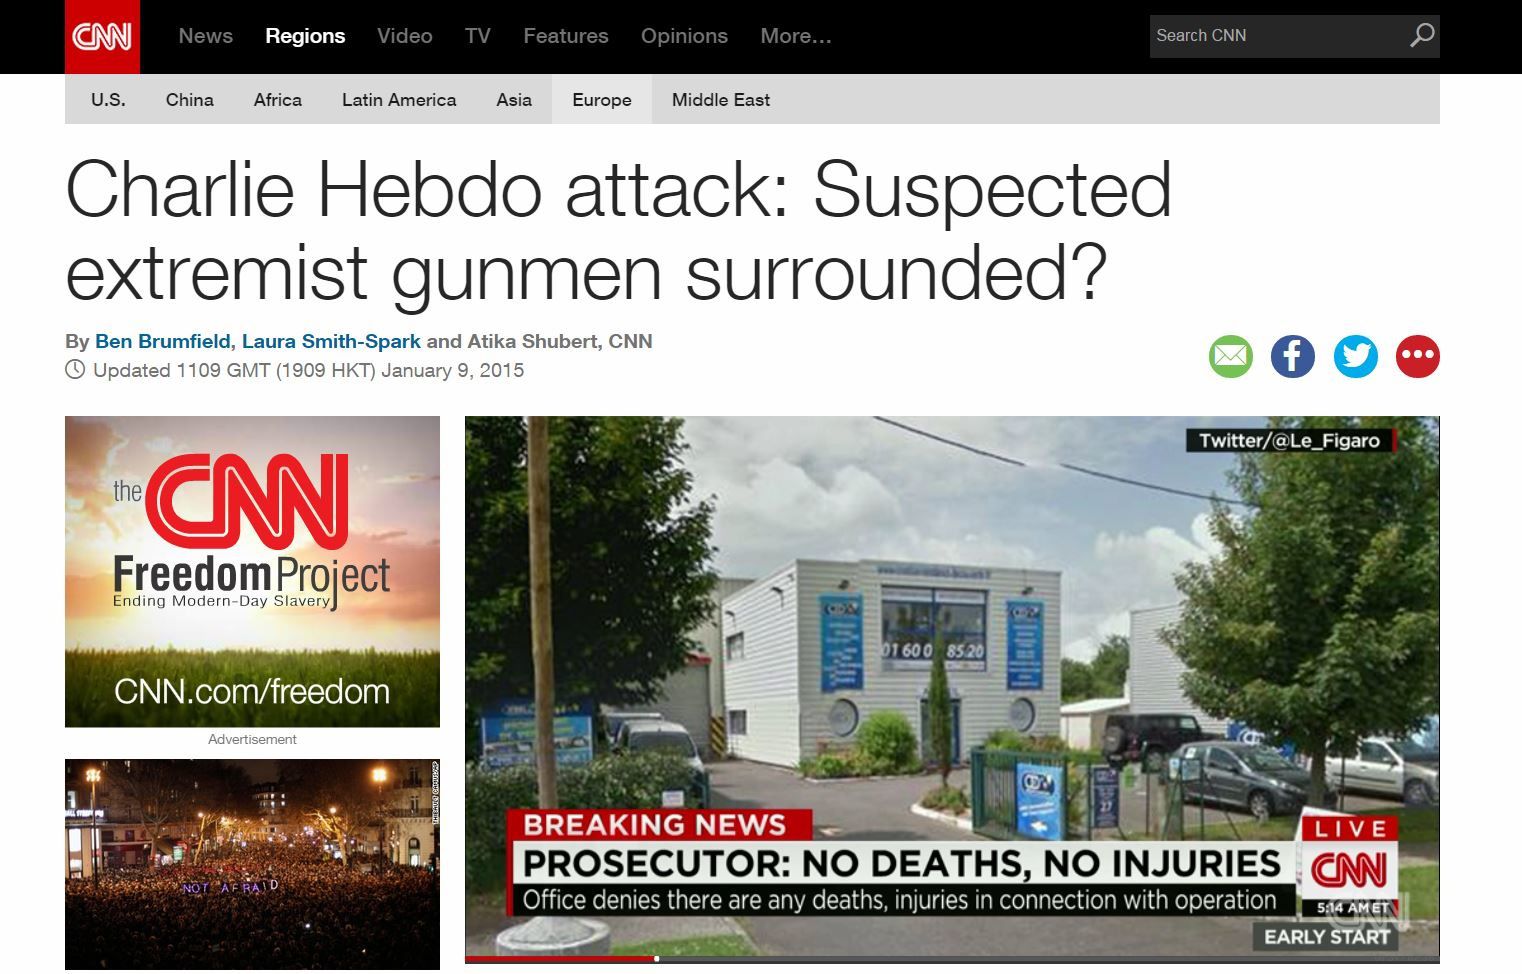 CNN claims : &quot;SURROUNDED&quot;